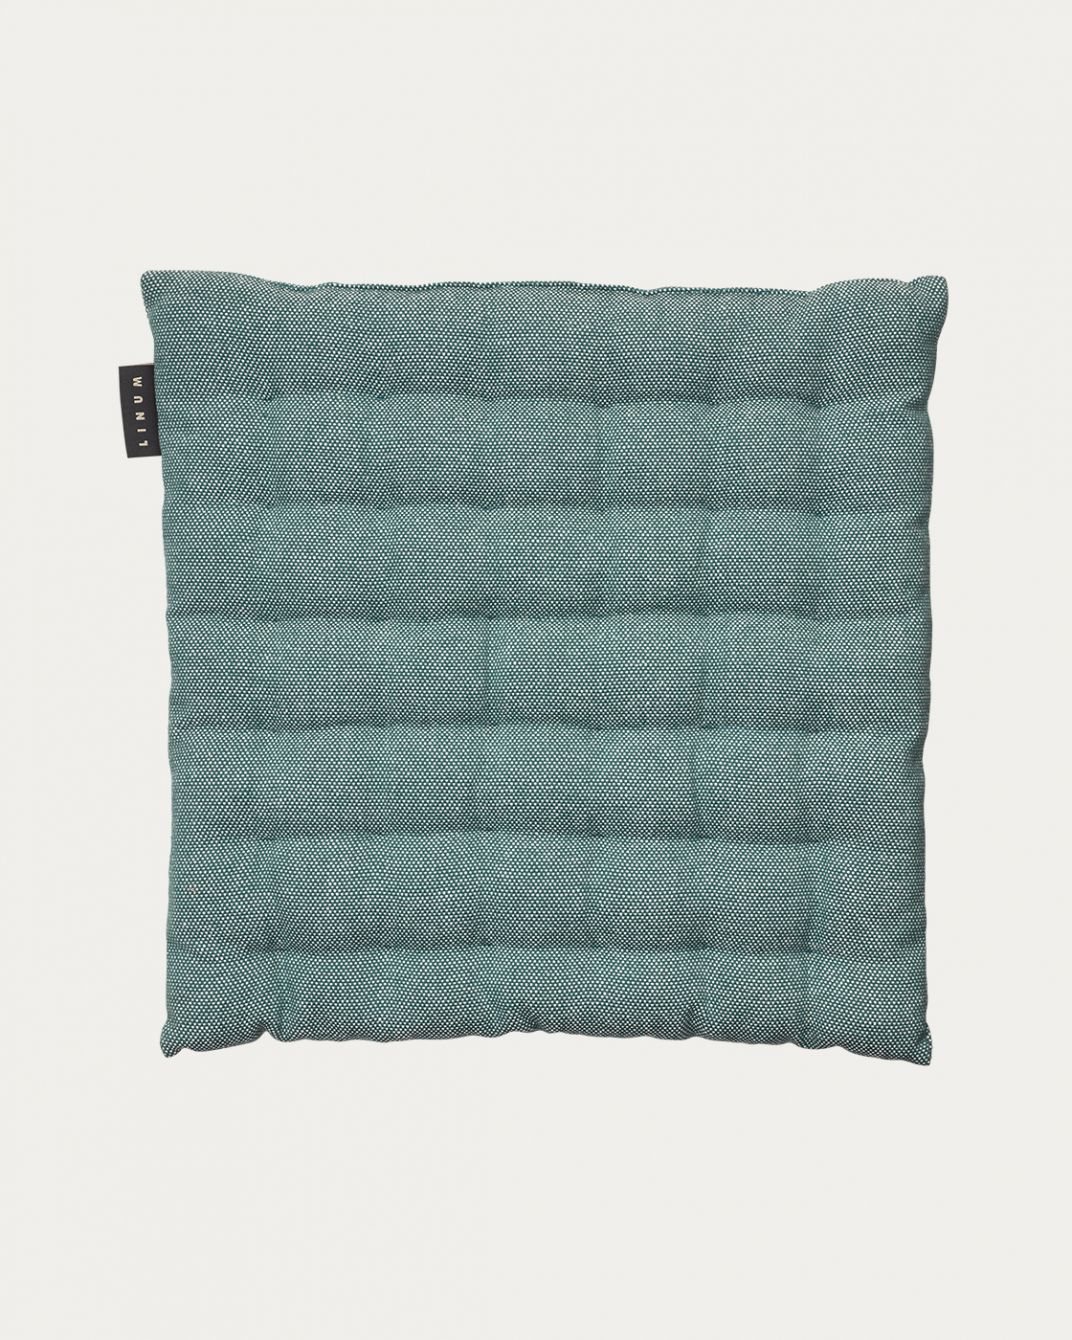 Product image dark grey turquoise PEPPER seat cushion made of soft cotton with recycled polyester filling from LINUM DESIGN. Size 40x40 cm.